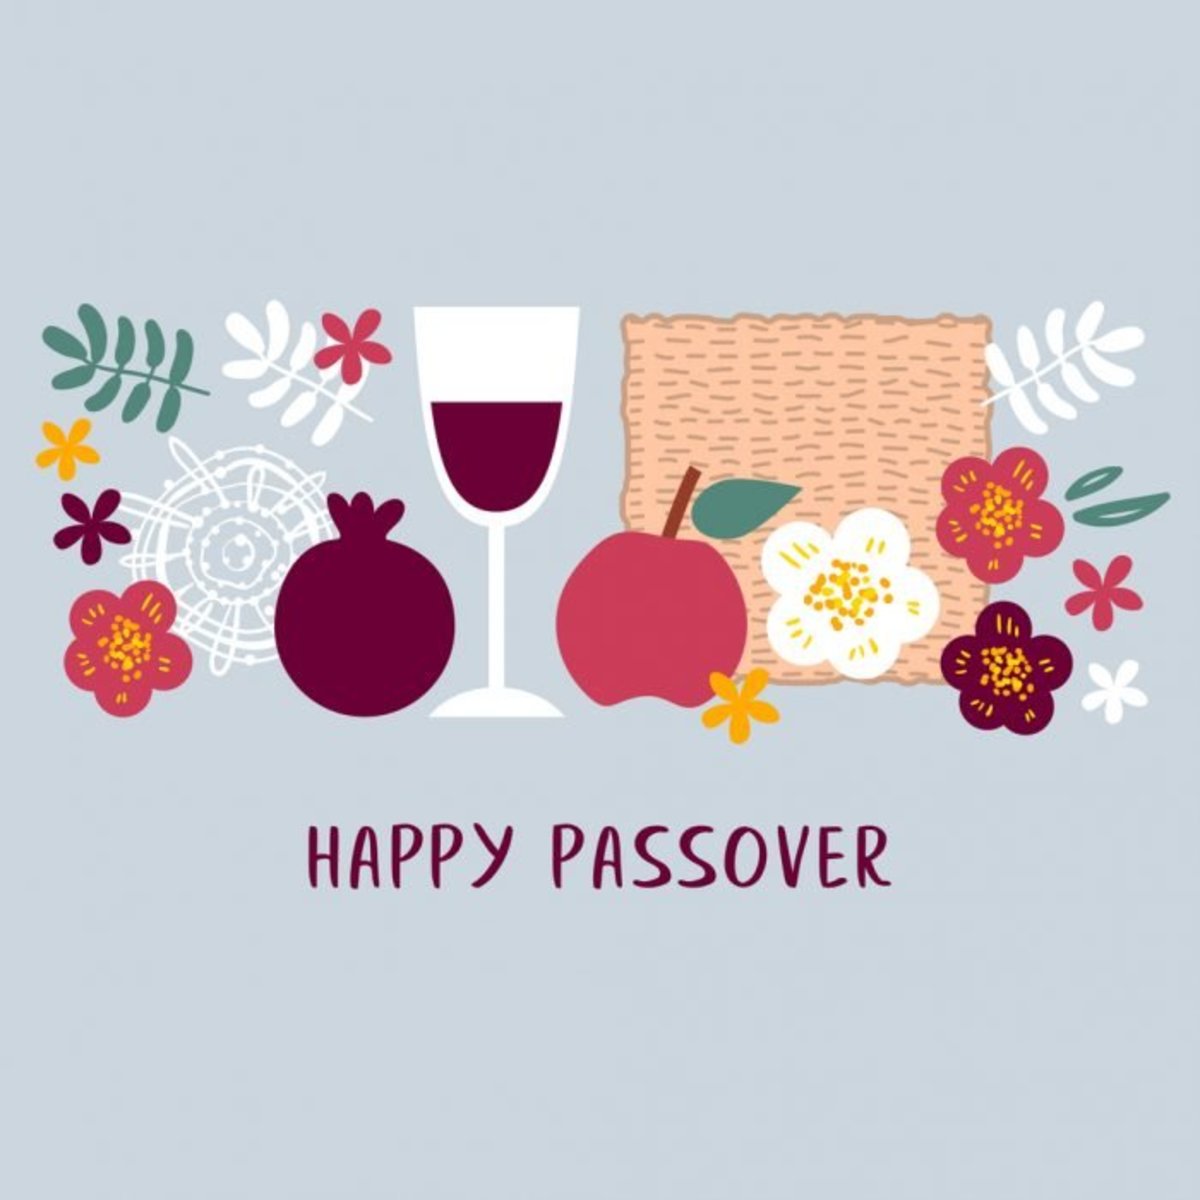 Happy Passover Greetings wishes